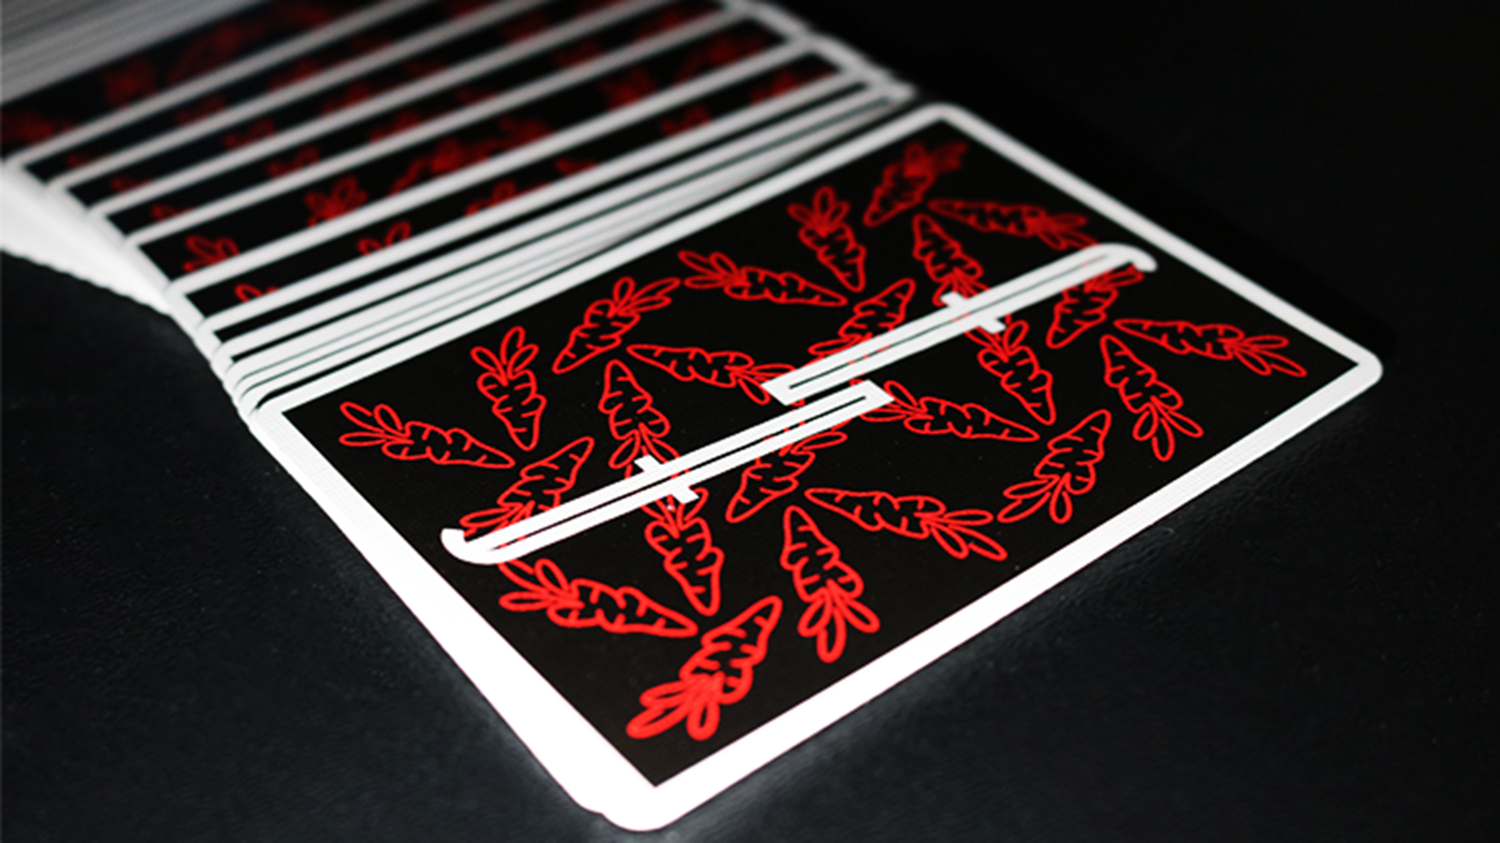 Fontaine Carrots v2,v3 : Playing cards, Poker, Magic, Cardistry, Singapore